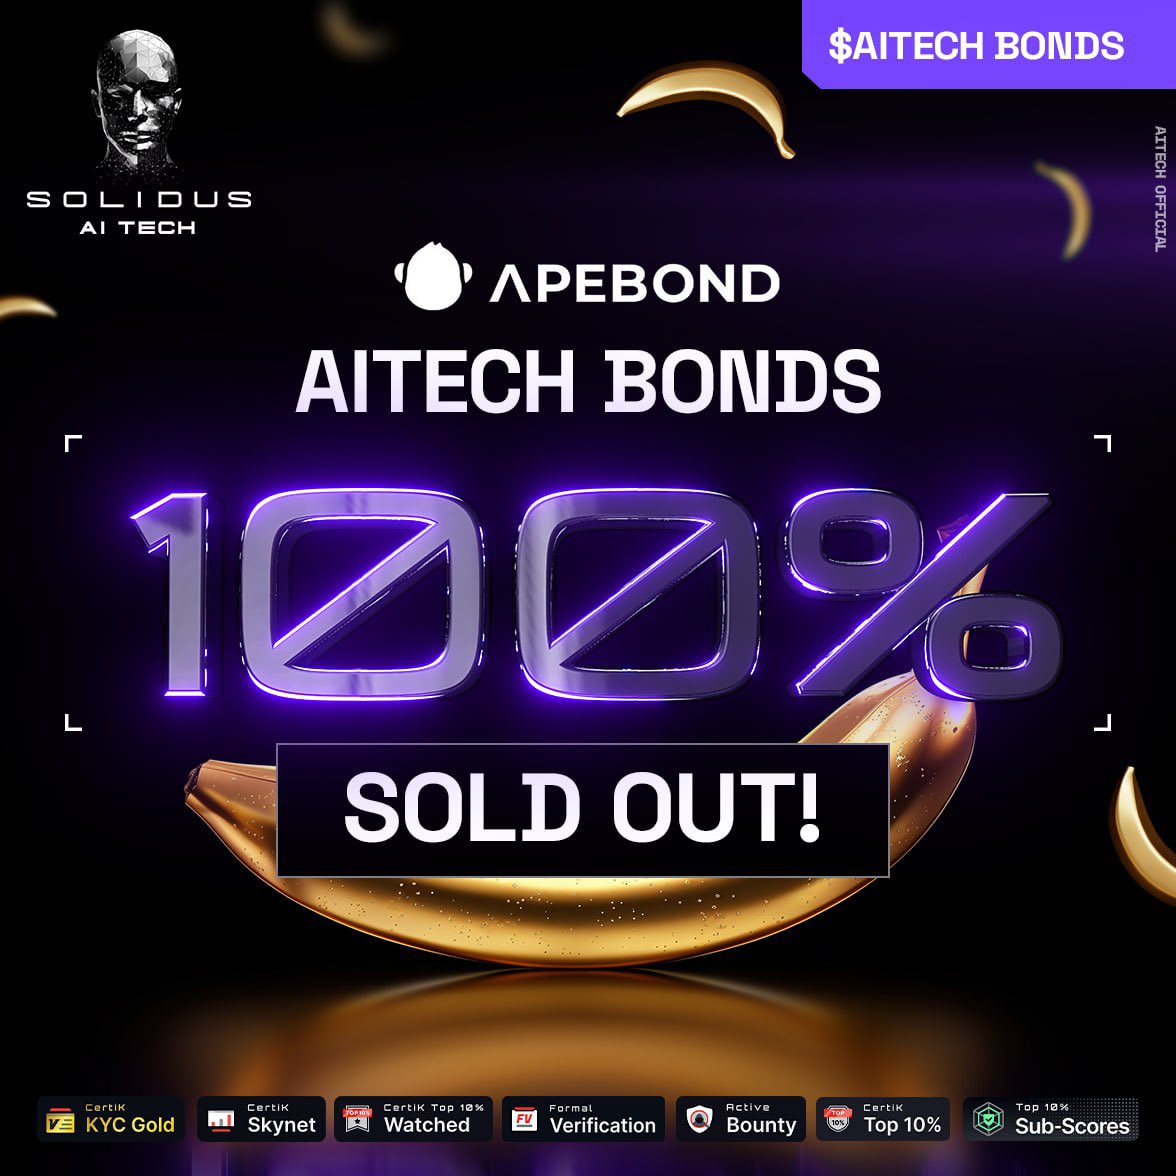 💰 $AITECH Bonds - Sold Out!

🌟 We are thrilled to announce that $AITECH bonds on ApeBond are now 100% sold out!